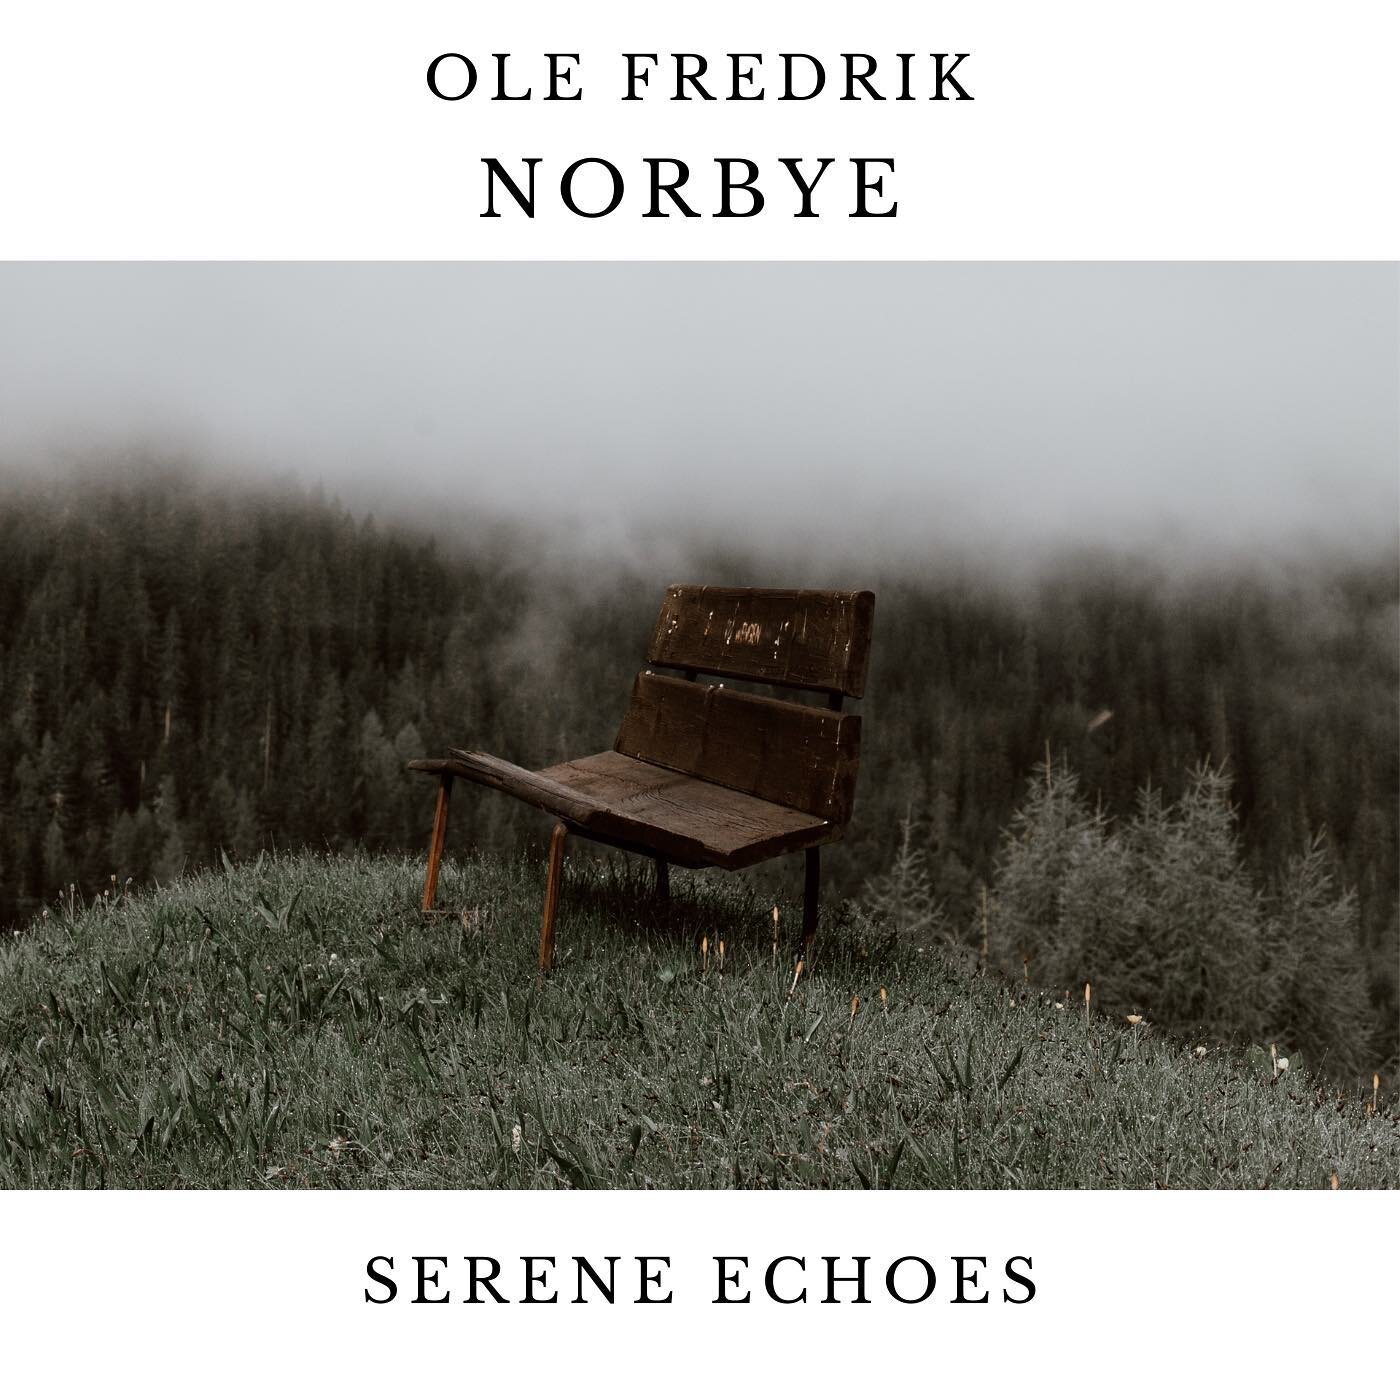 &laquo;Serene Echos will be released on @nxnrecordings soon! 🎉 Recorded at Musikkloftet with the help from the amazing @vidarlunden! 👏Presave the album by using link in bio. 🎹 #spotify #spotifyforartists #jazz #neoclassicalpiano #nasjonaljazzscene